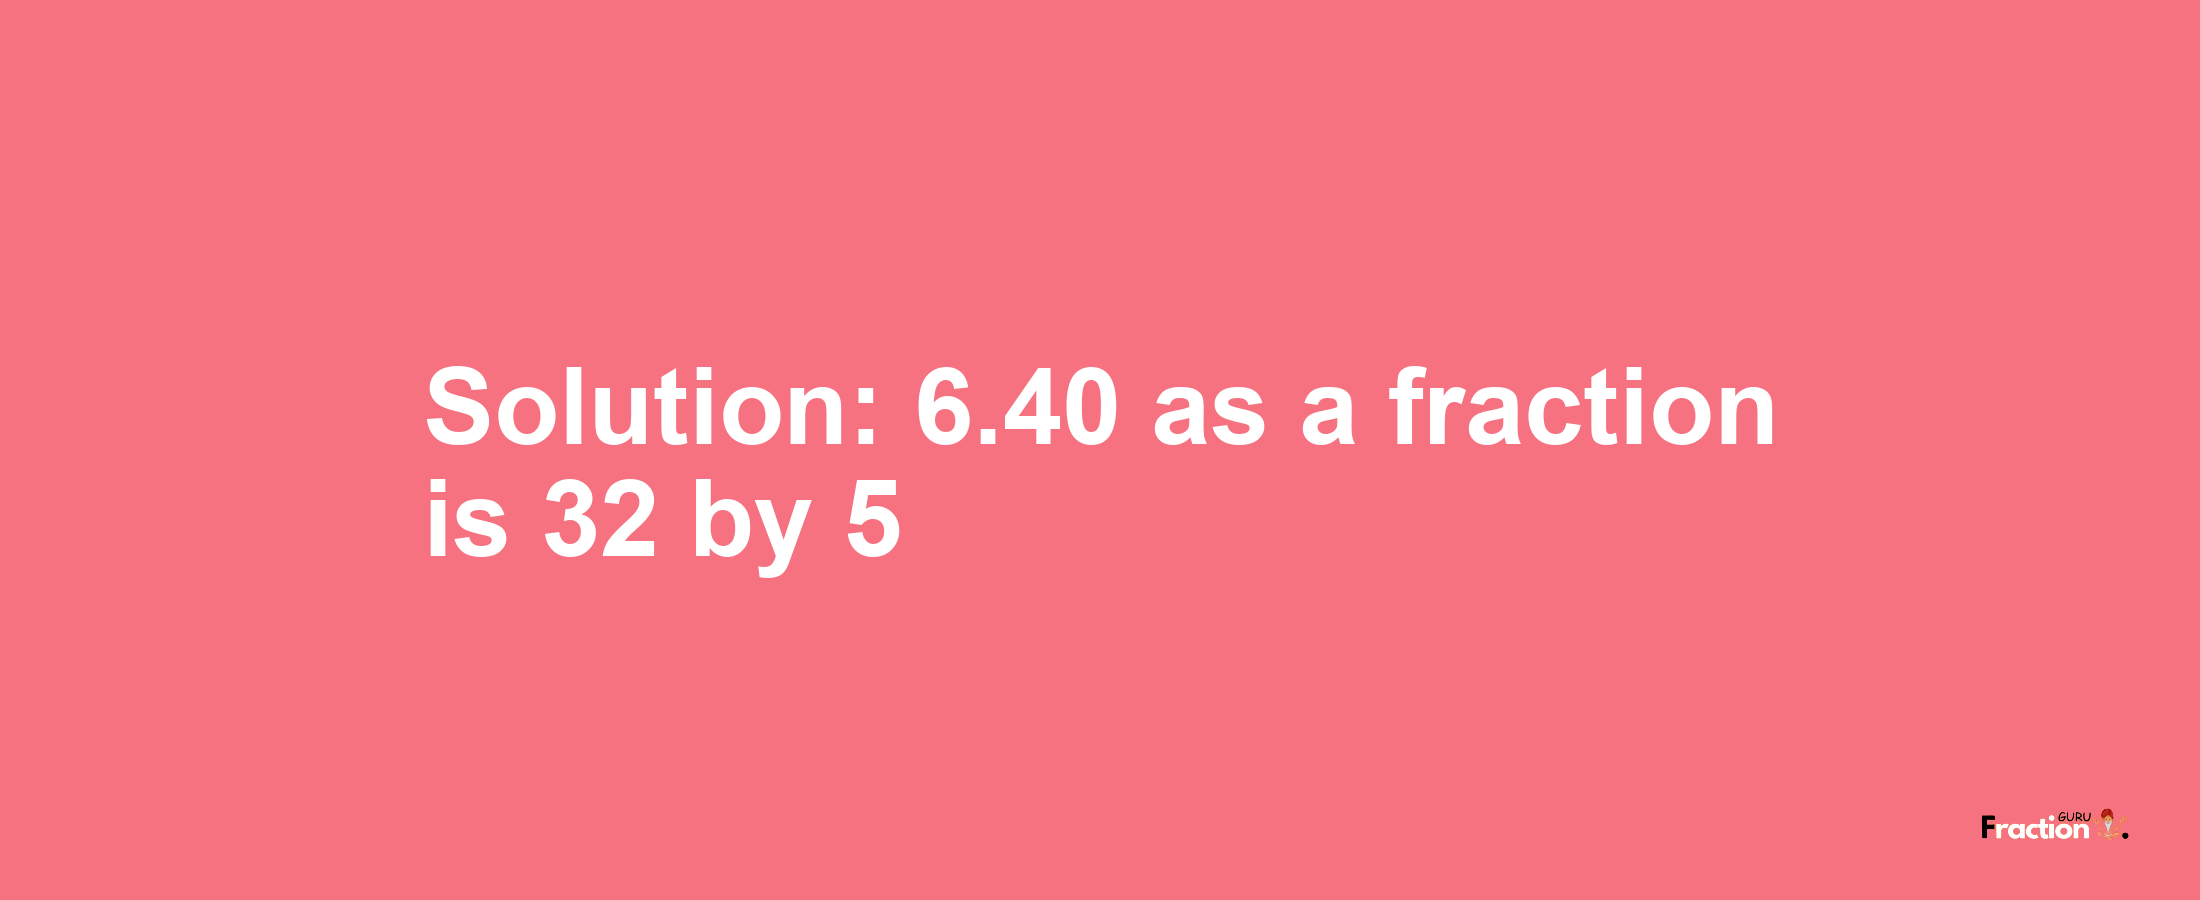 Solution:6.40 as a fraction is 32/5